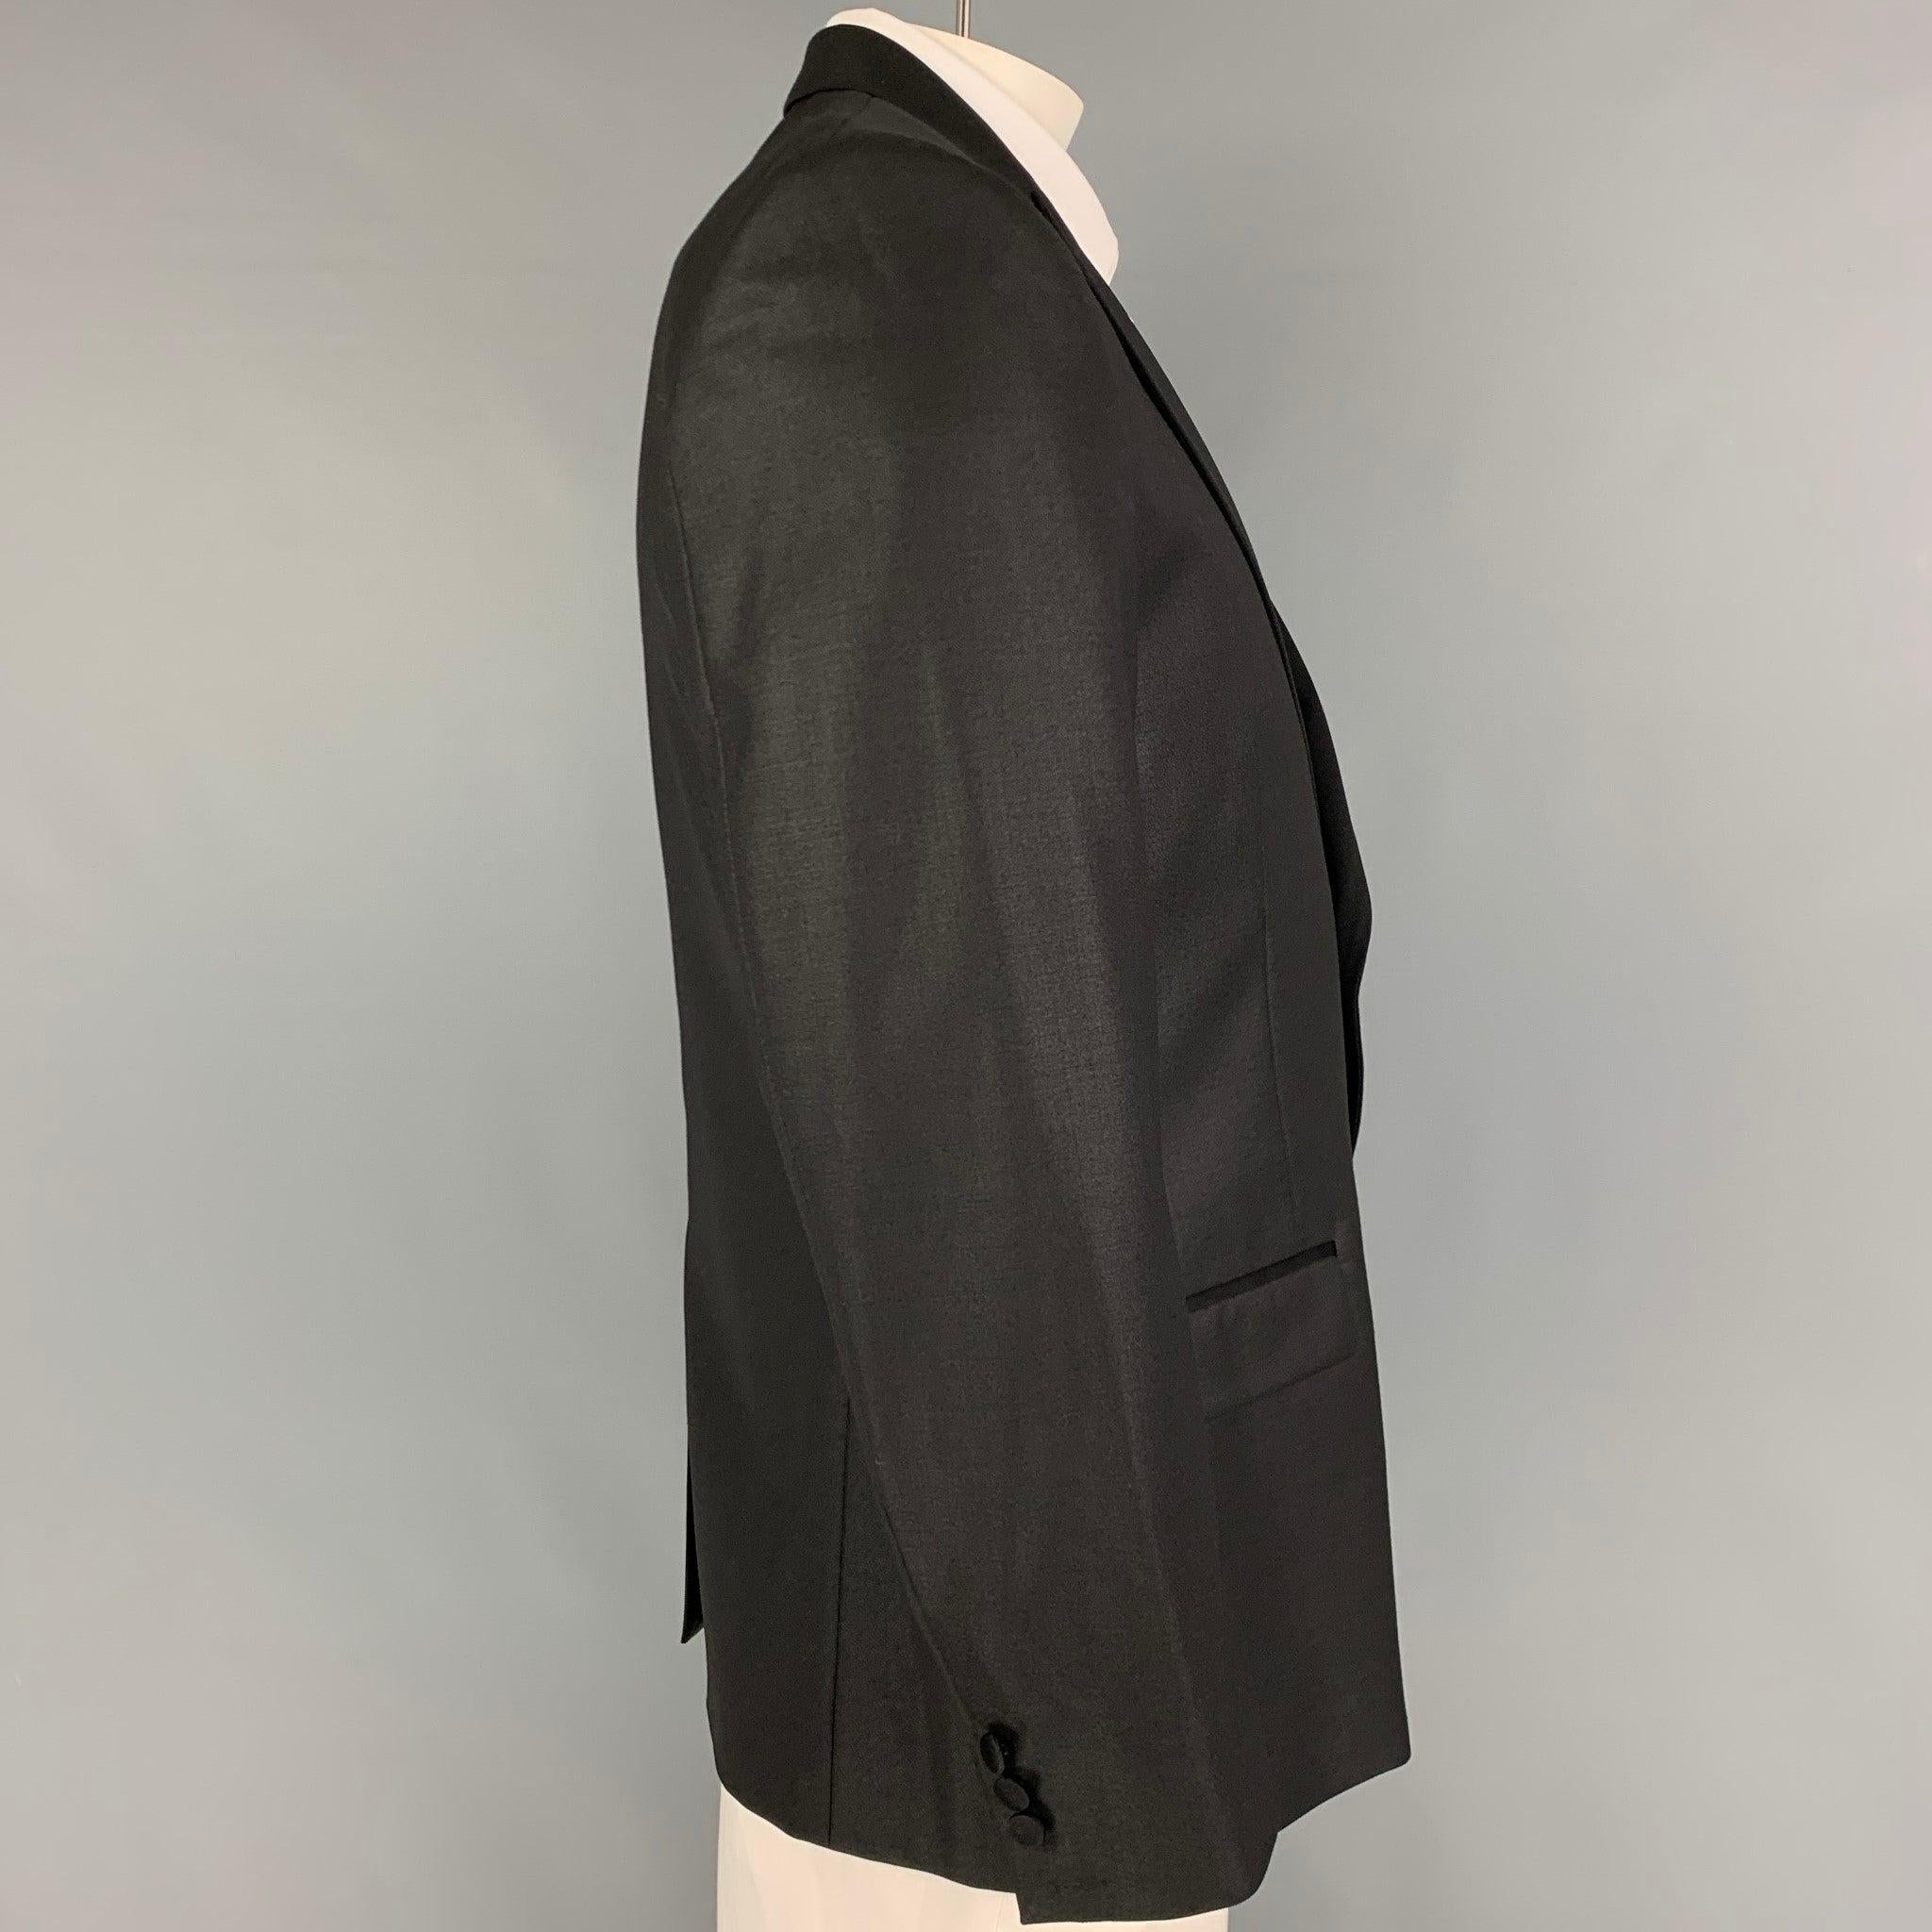 VERSACE COLLECTION sport coat comes in a black polyester blend with a peak lapel, flap pockets, single back vent, and a double button closure.
Very Good
Pre-Owned Condition. 

Marked:   52 

Measurements: 
 
Shoulder:
18.5 inches  Chest: 42 inches 